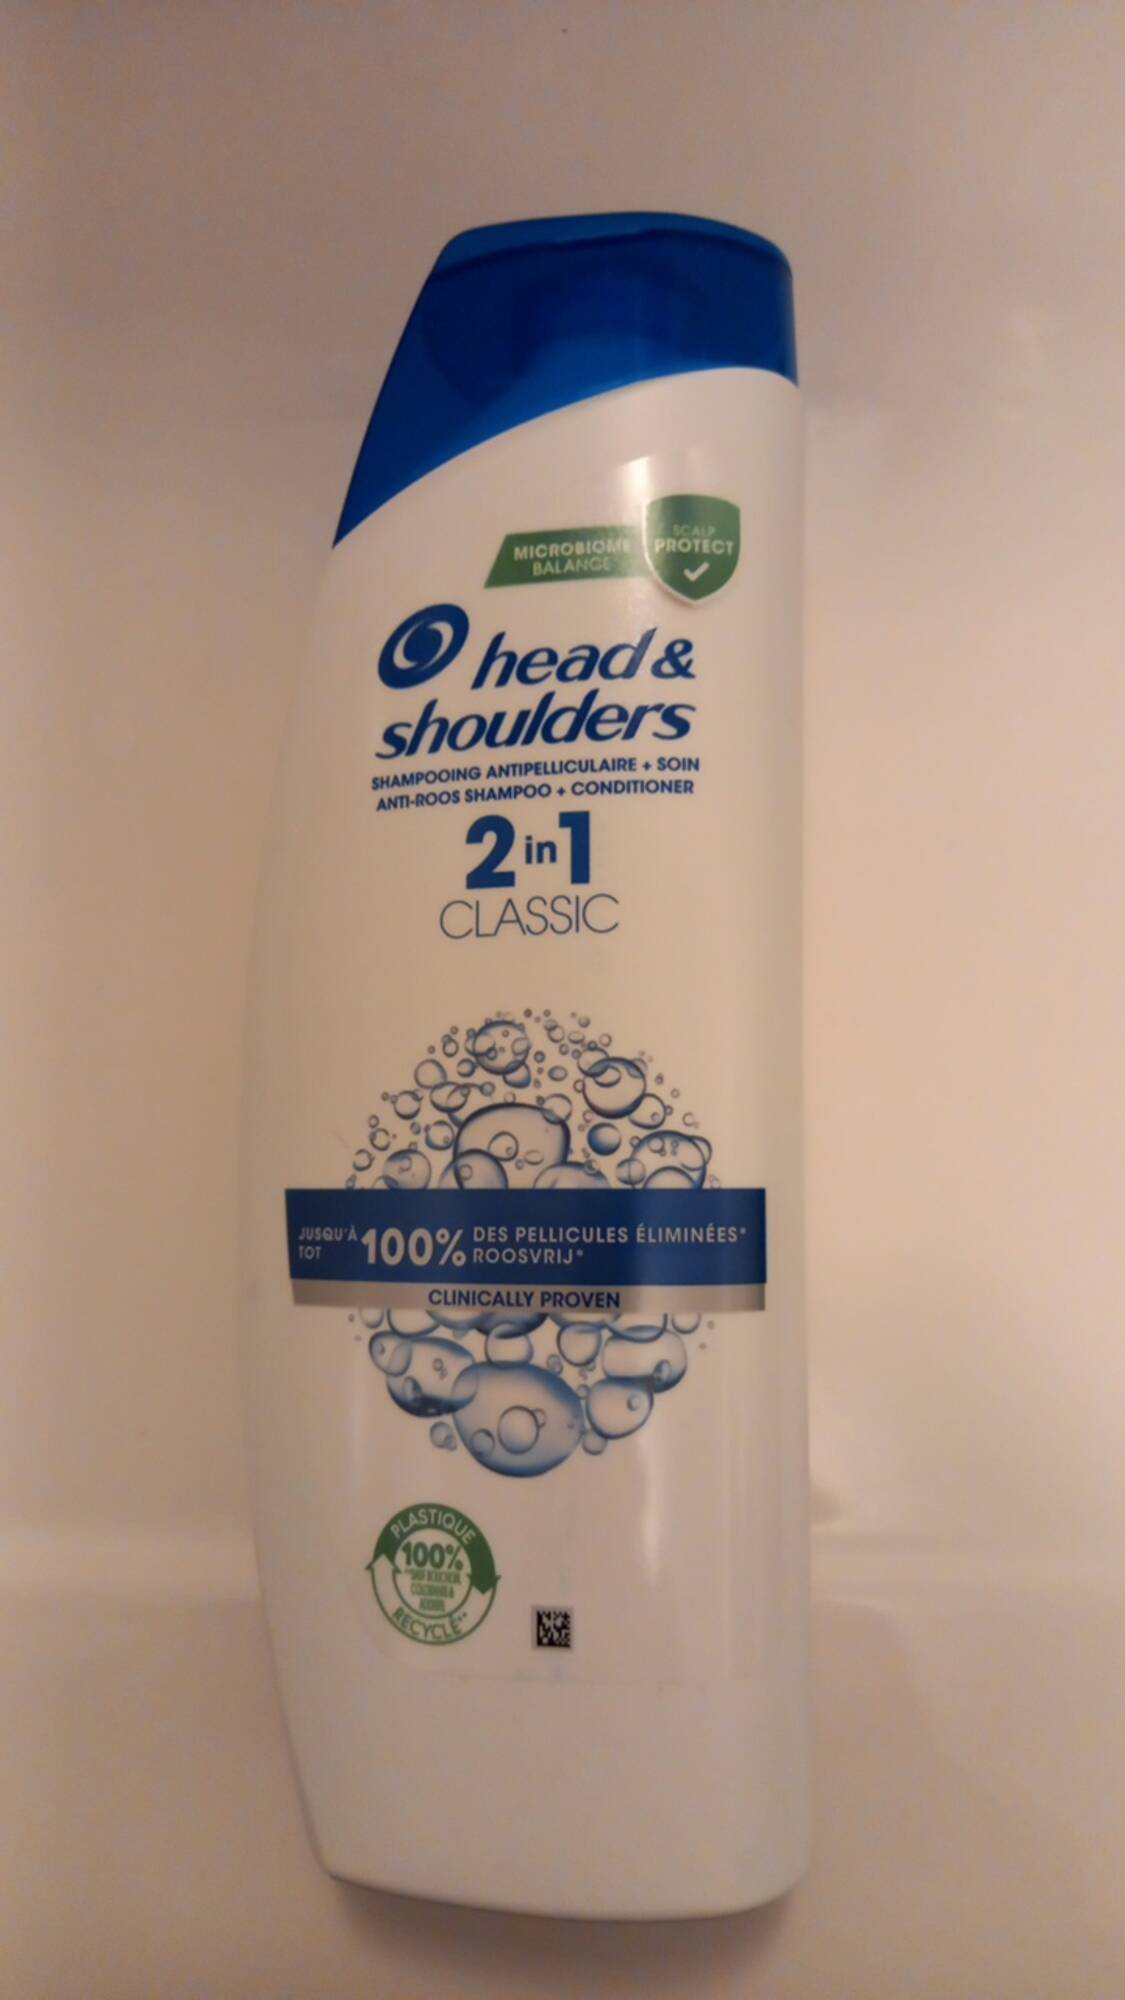 HEAD & SHOULDERS - 2 in 1 classic - Shampooing antipelliculaire